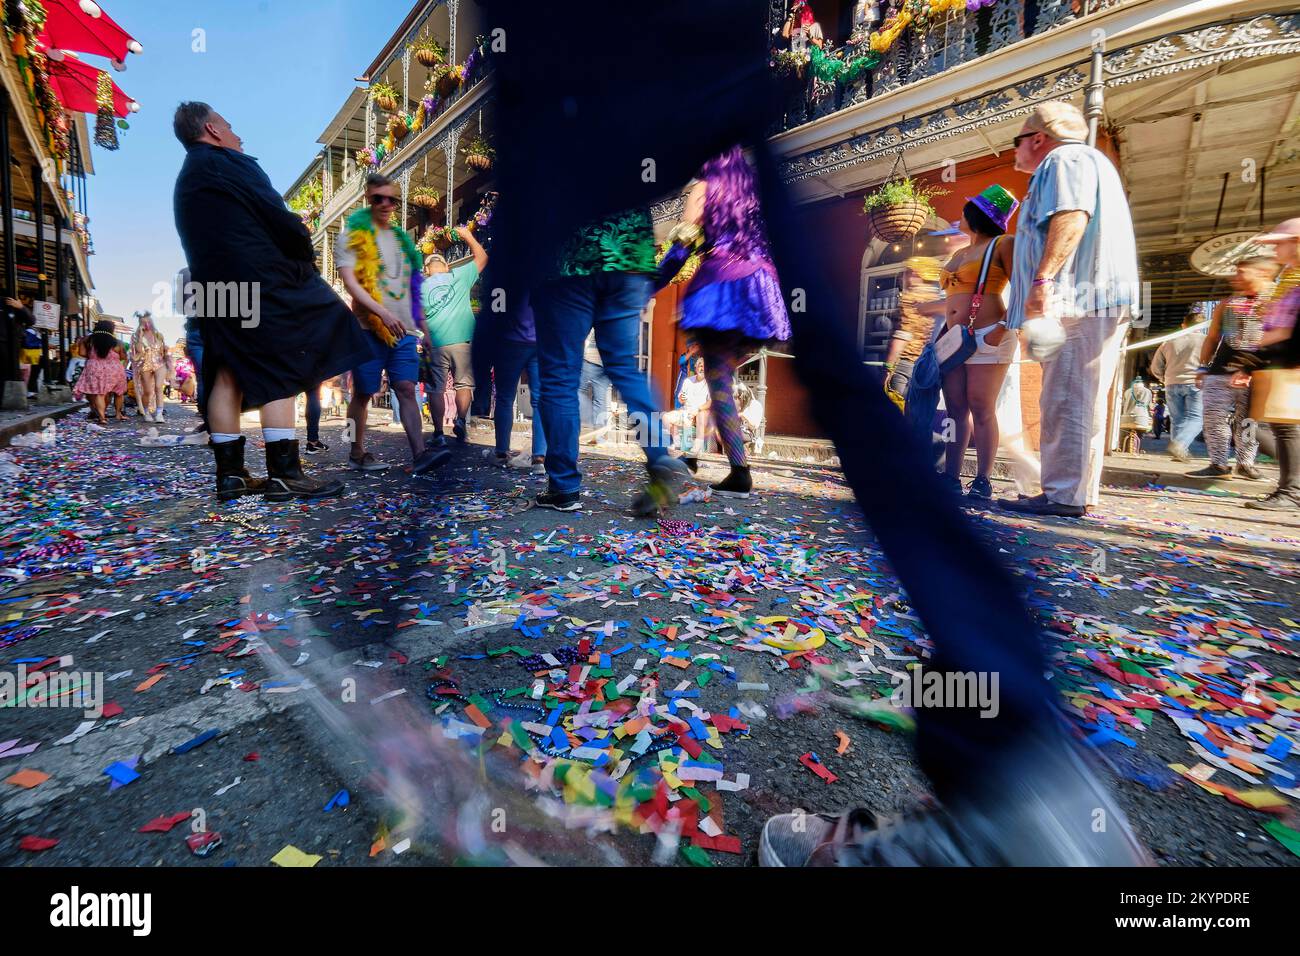 New Orleans, Louisiana, USA. 1st Mar, 2022. People walk through the confetti and bead covered streets of the French Quarter during Fat Tuesday Mardi Gras celebrations in New Orleans, Louisiana USA on March 01, 2022. Mardi Gras parades and festivities were cancelled in the city last year due to the Covid-19 pandemic. (Credit Image: © Dan Anderson/ZUMA Press Wire) Stock Photo